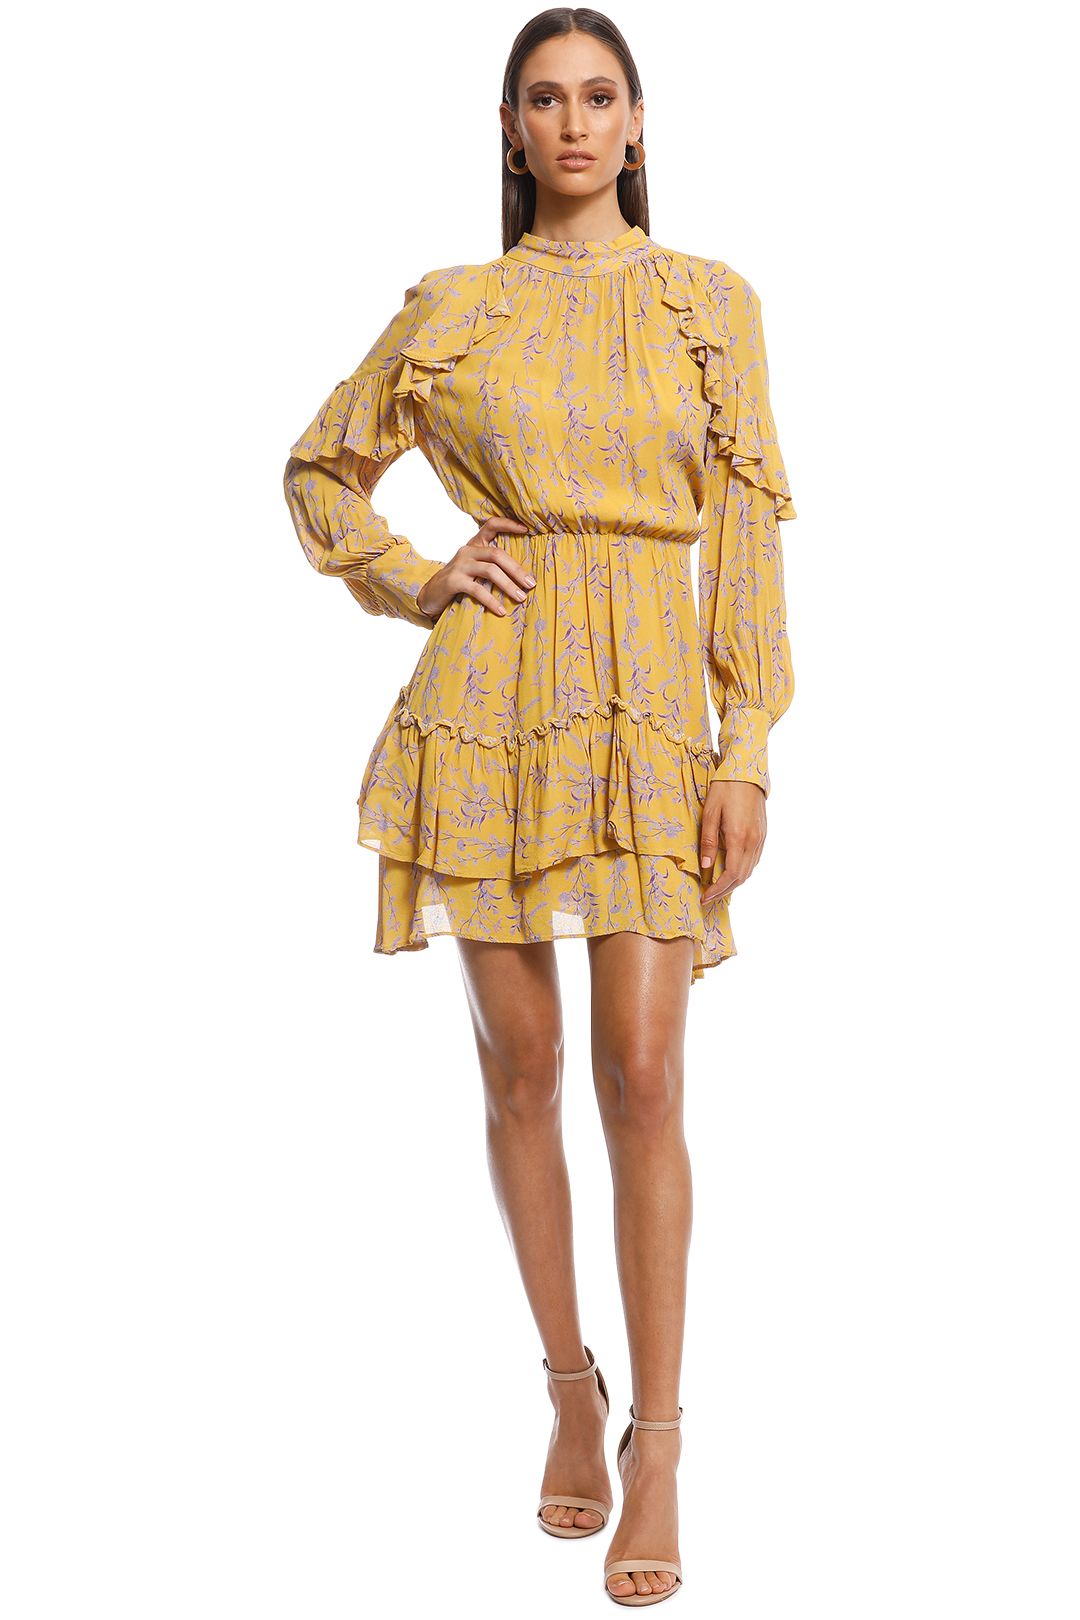 Talulah - In The Mix Mini Dress - Mustard - Front